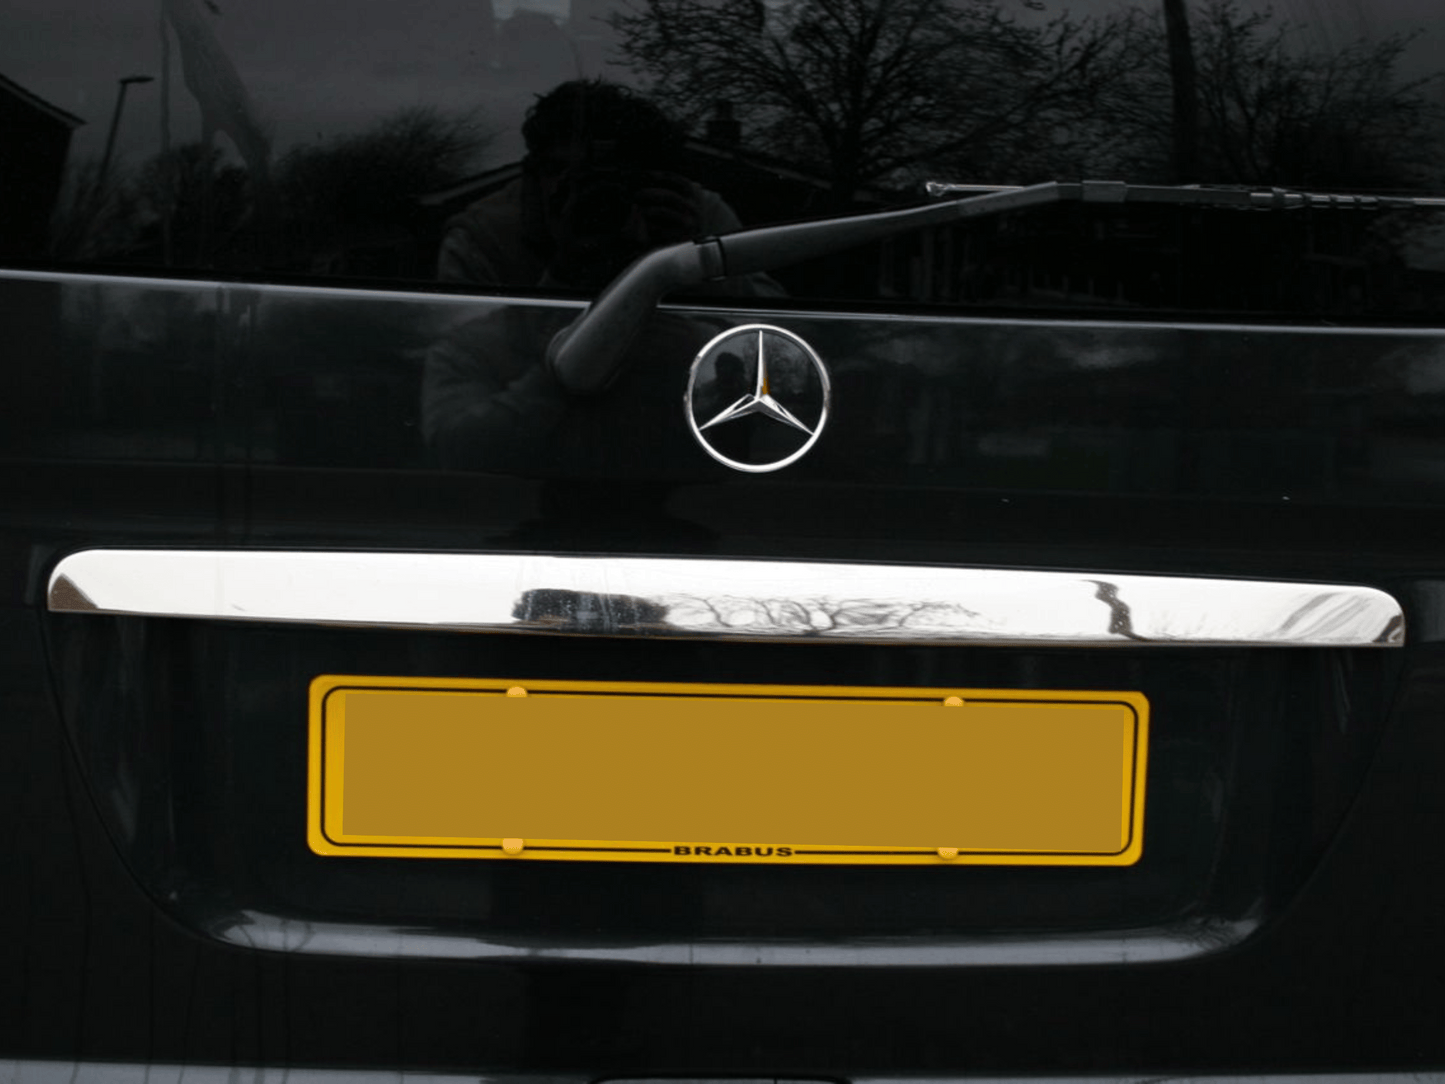 Tailgate Number Plate Trim For Mercedes Vito (Ideal Gift)